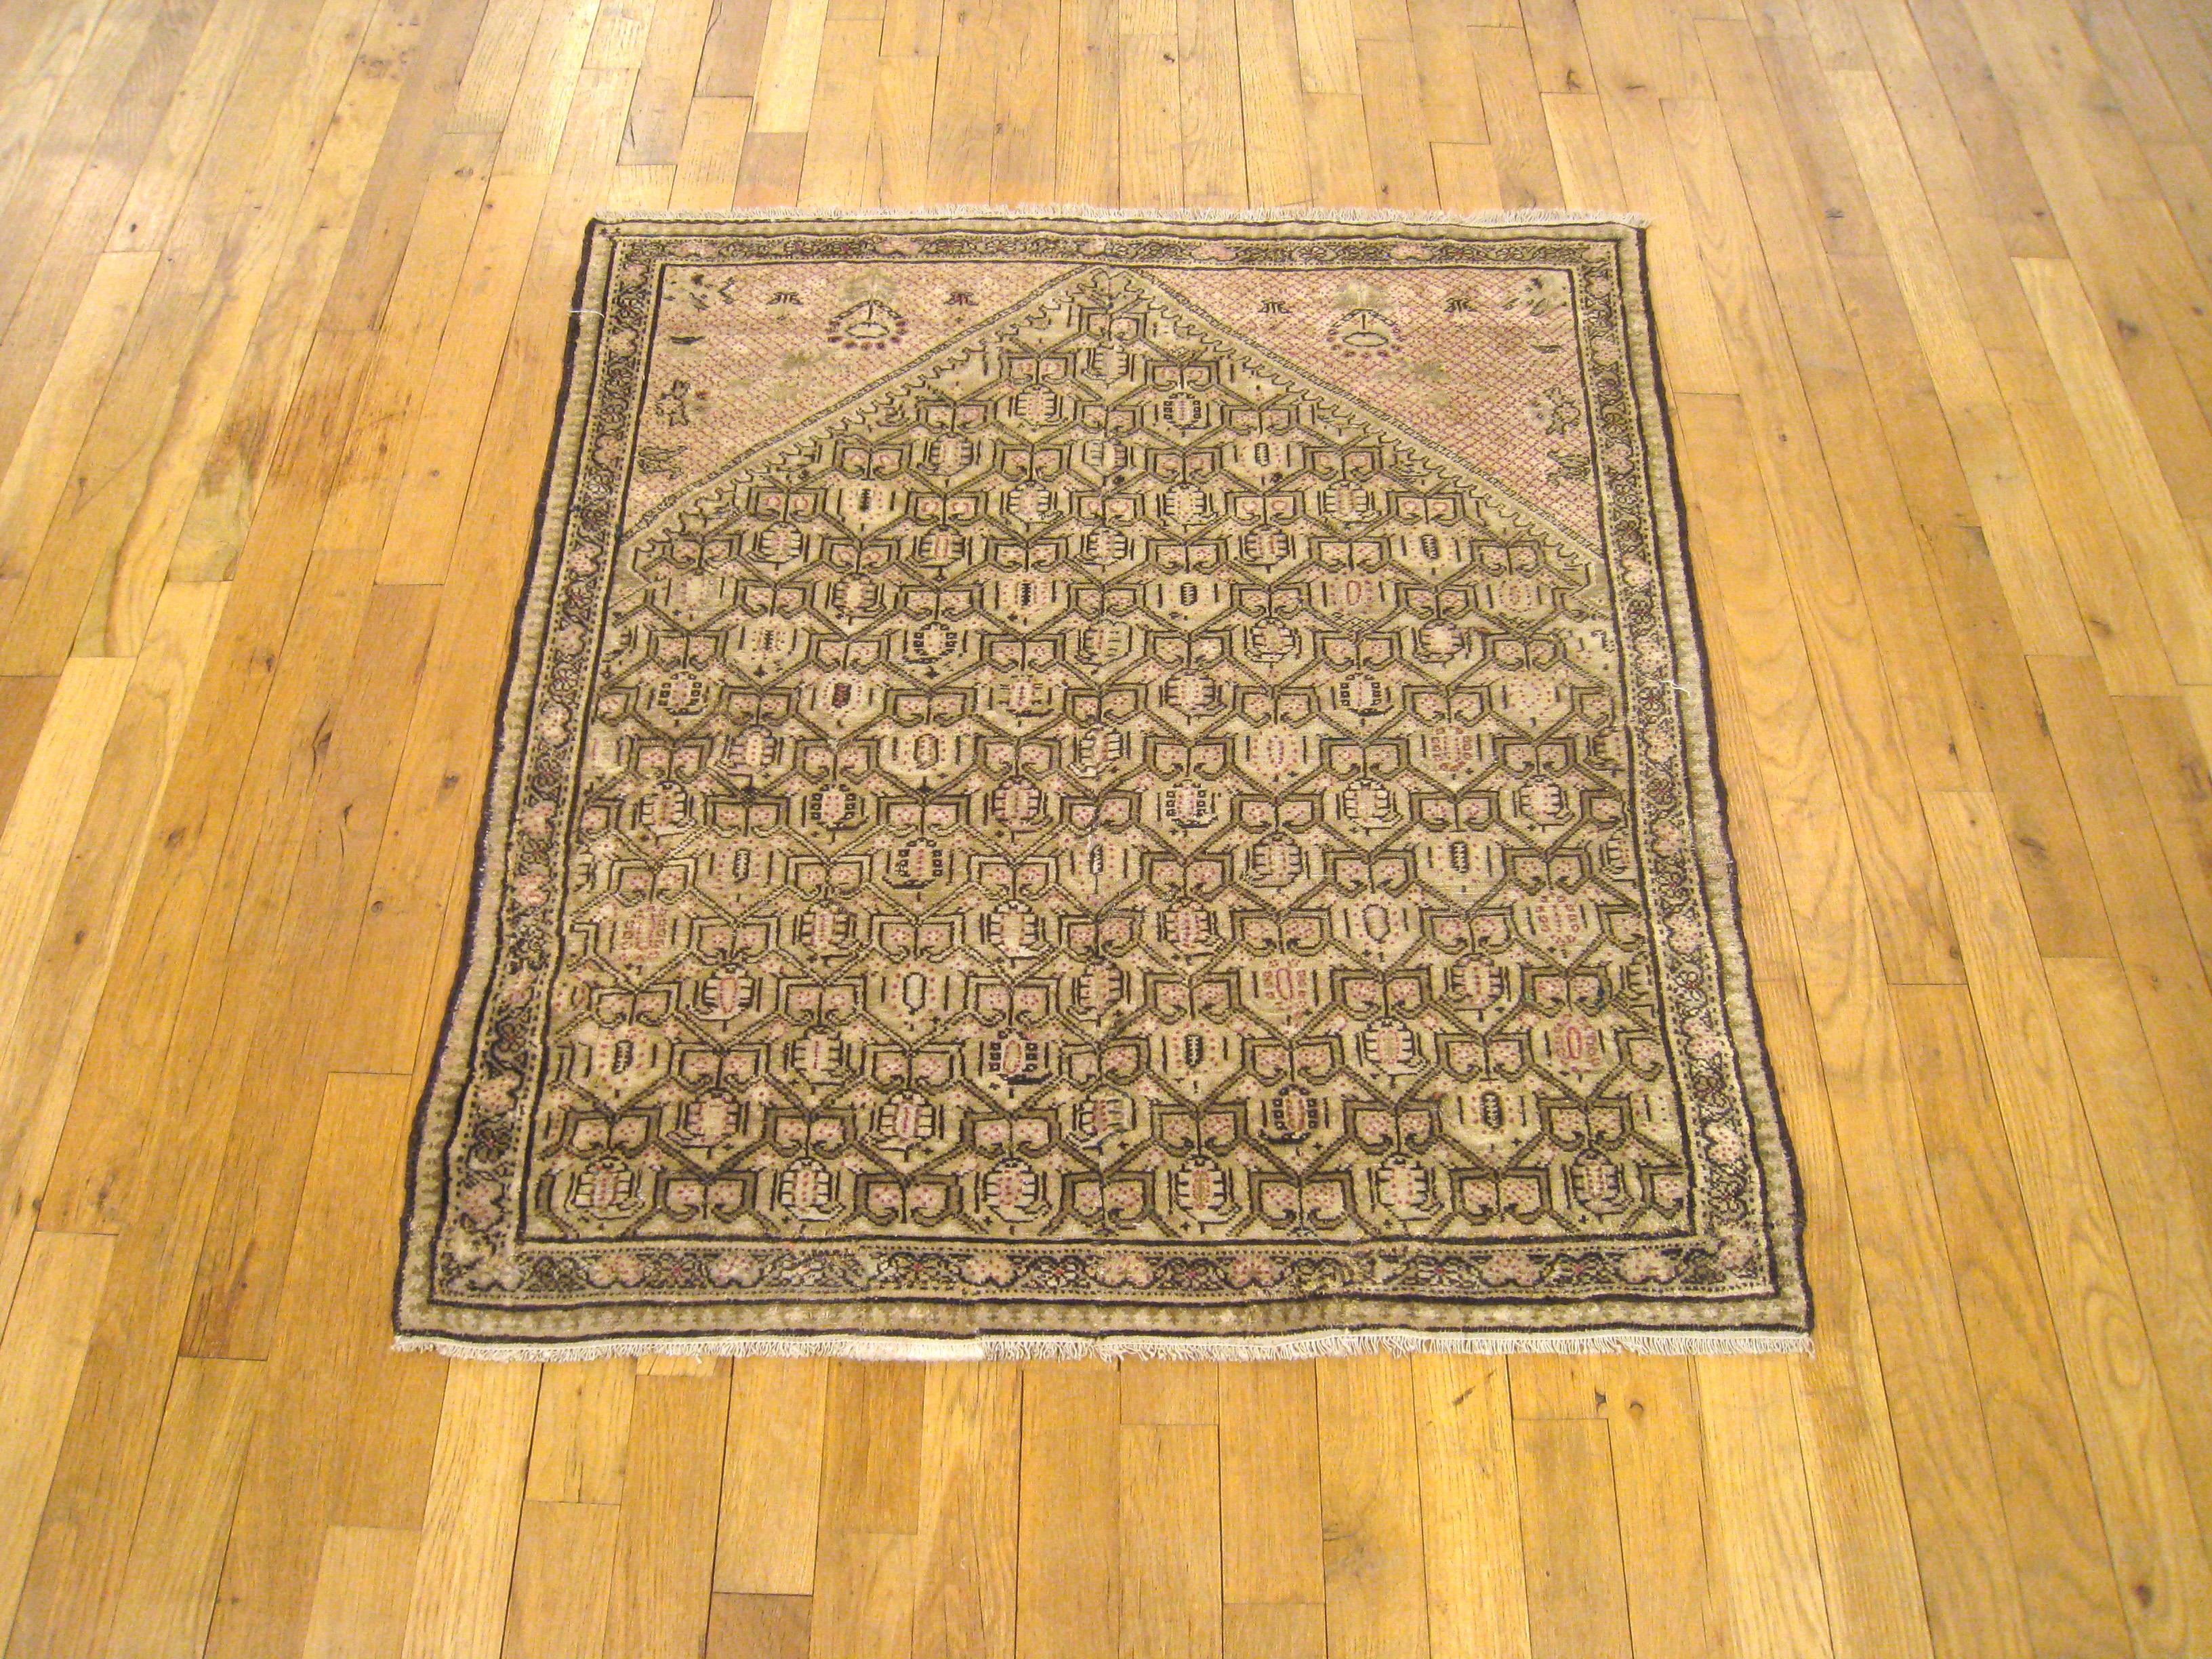 An antique Persian Seneh Oriental rug, circa 1900, size 3'3 x 3'0. This handsome collectible carpet features a stylized repeating design covering the soft earth tone field, with sparsely decorated camel colored swaths at the upper corners. Composed